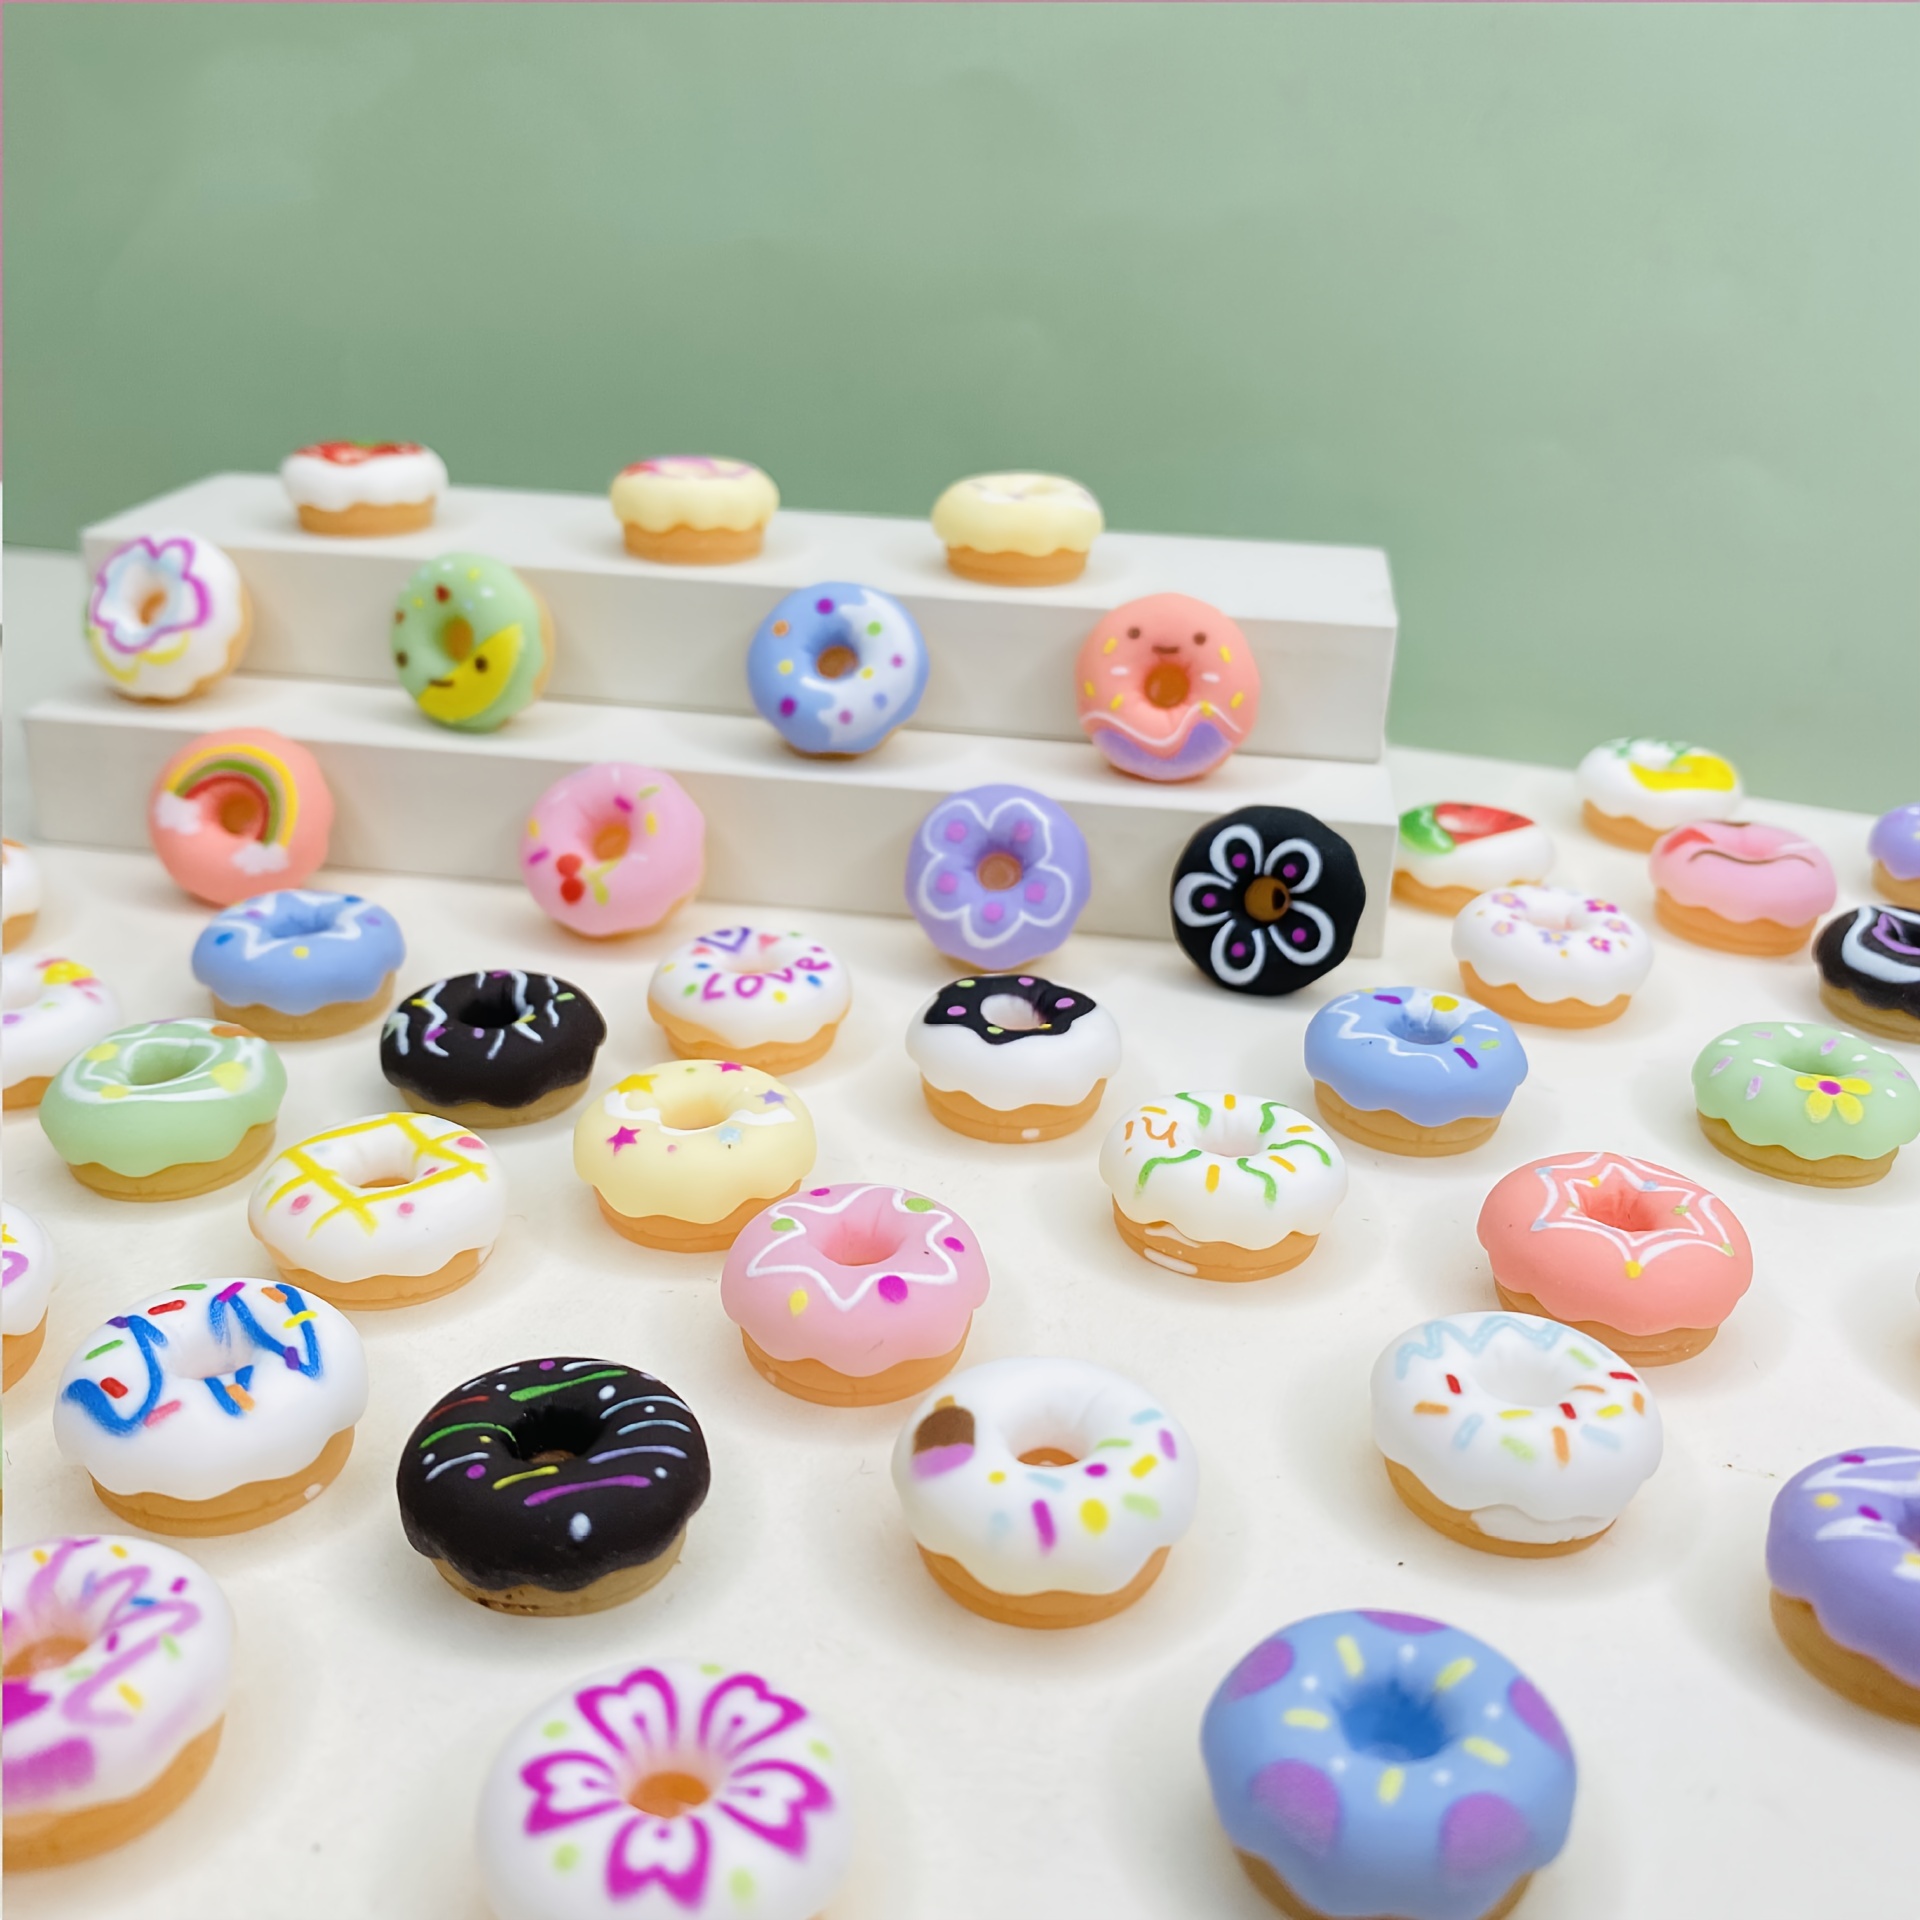 

Economy Pack 20pcs Simulated Food Toy Resin Colored Donuts Suitable For Diy Night Light Parking Sign Creative Keychain Pendant Jewelry Accessories